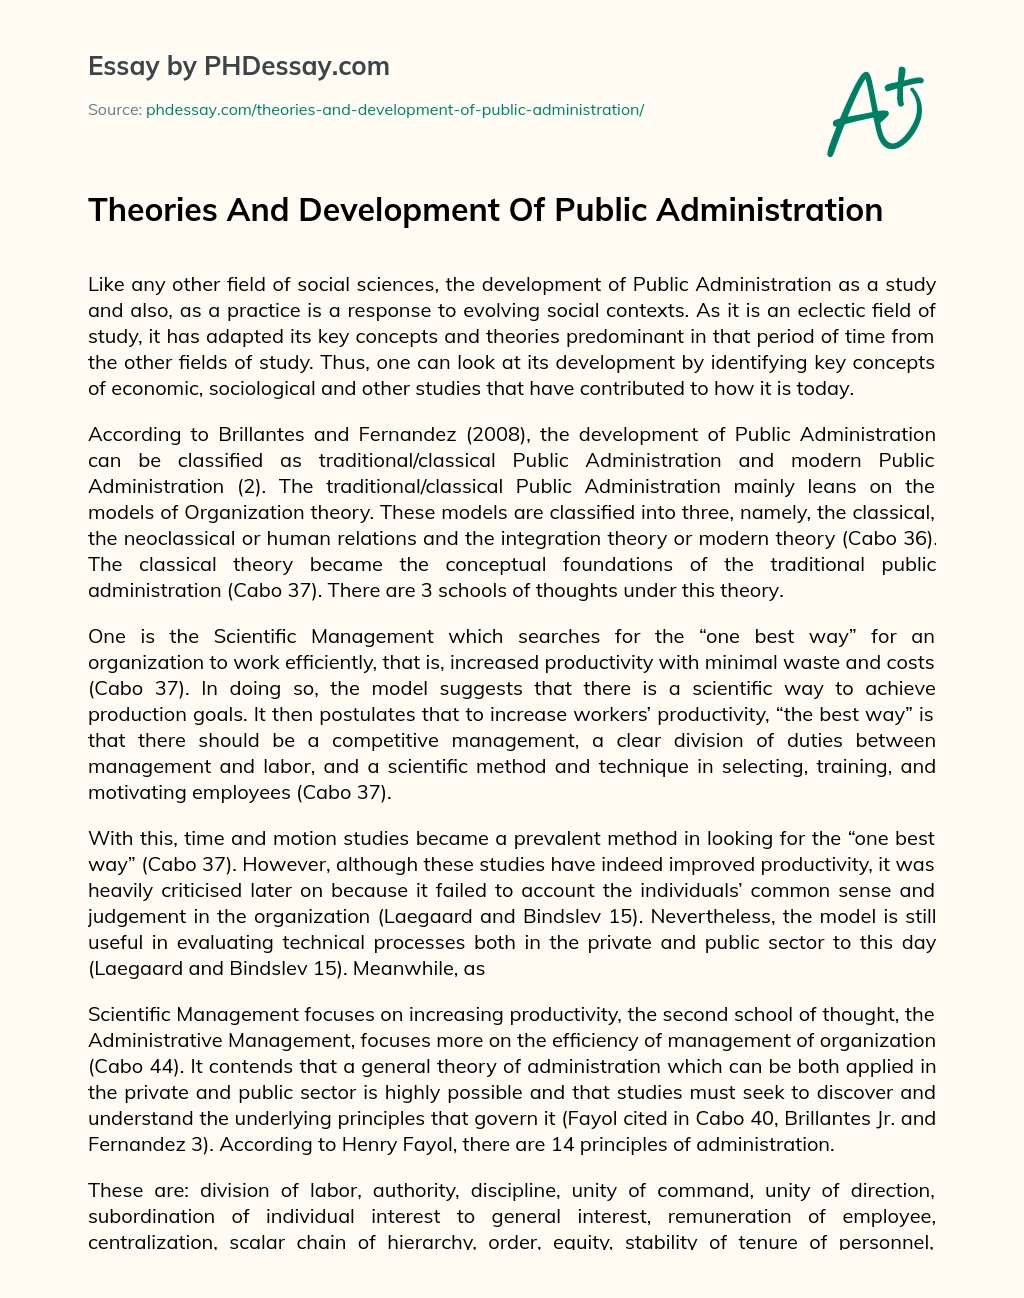 Theories And Development Of Public Administration essay